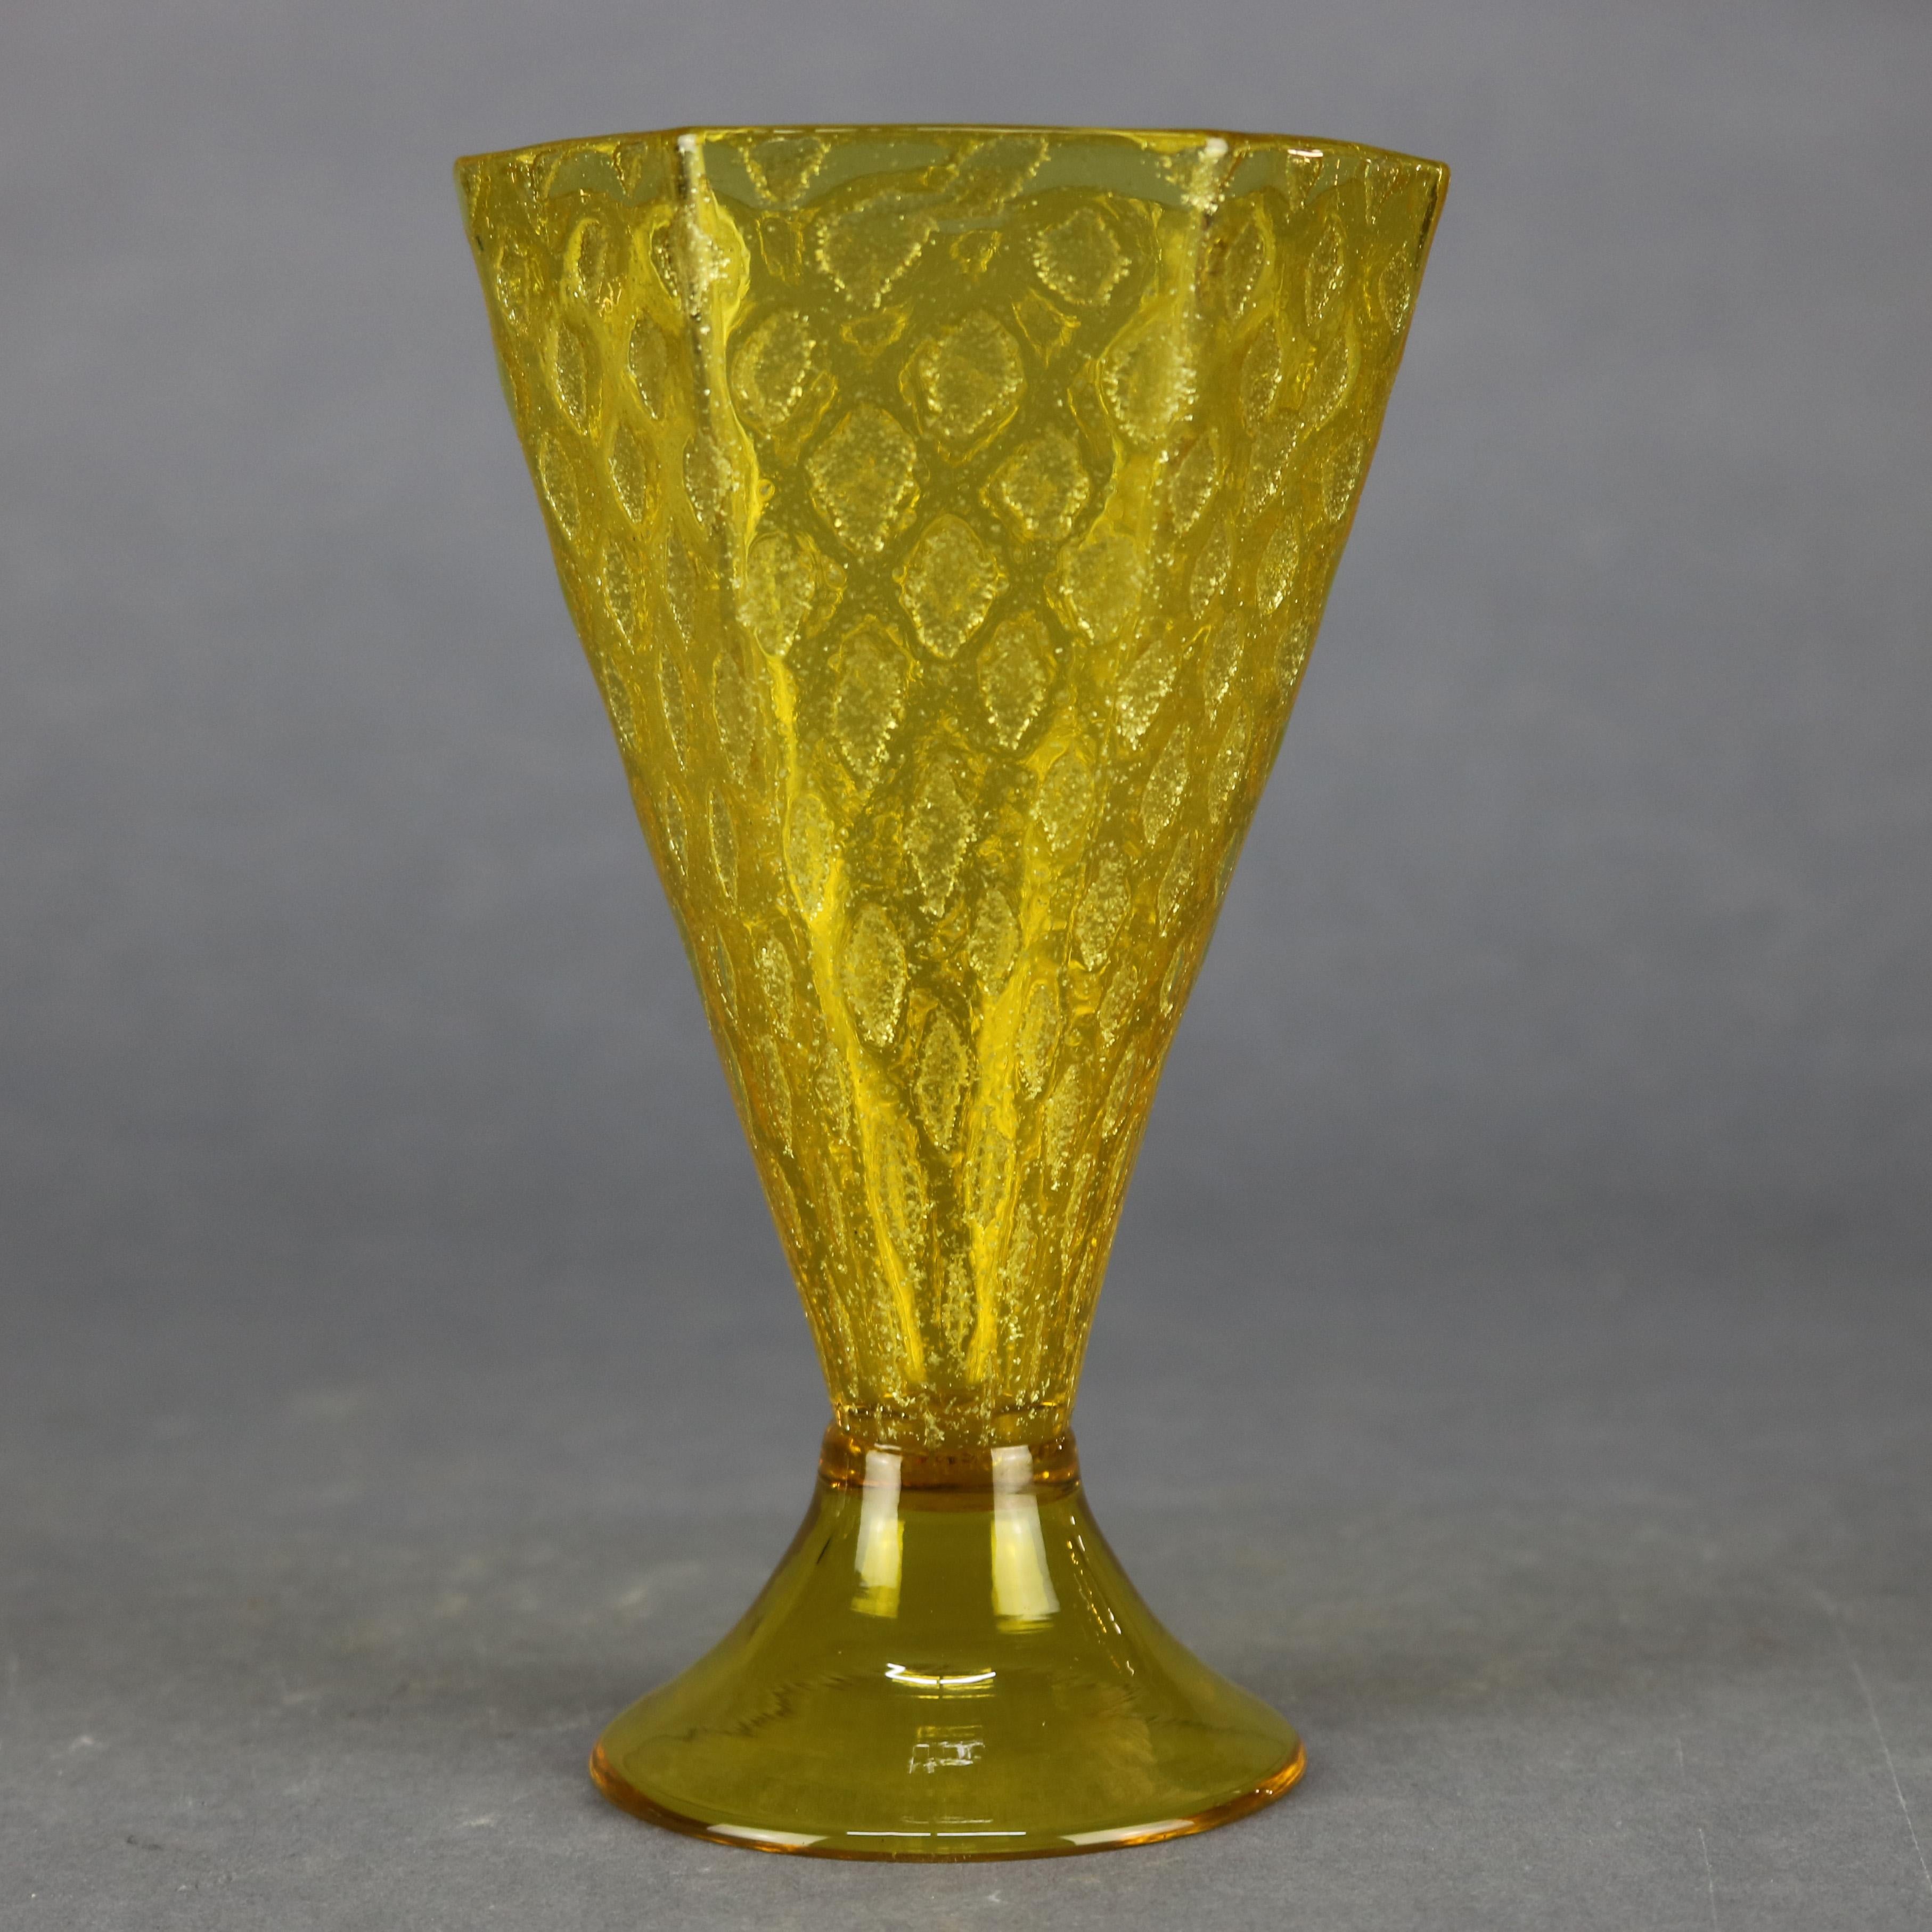 American Vintage Steuben Faceted Yellow Handcrafted Art Glass Vase, 20th Century